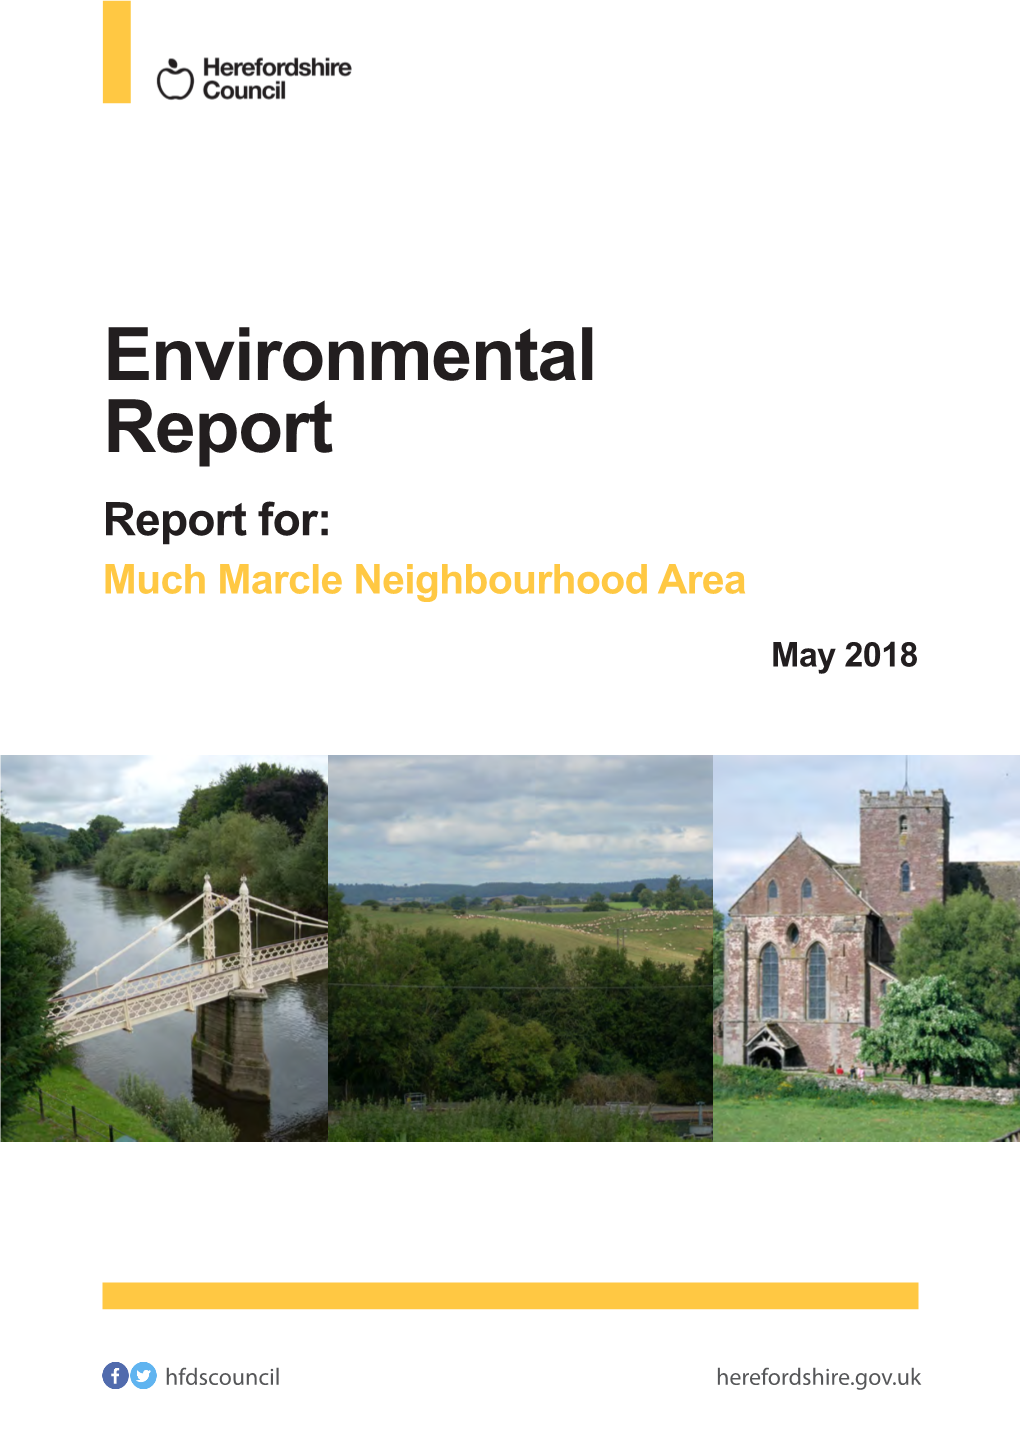 Much Marcle Environmental Report May 2018